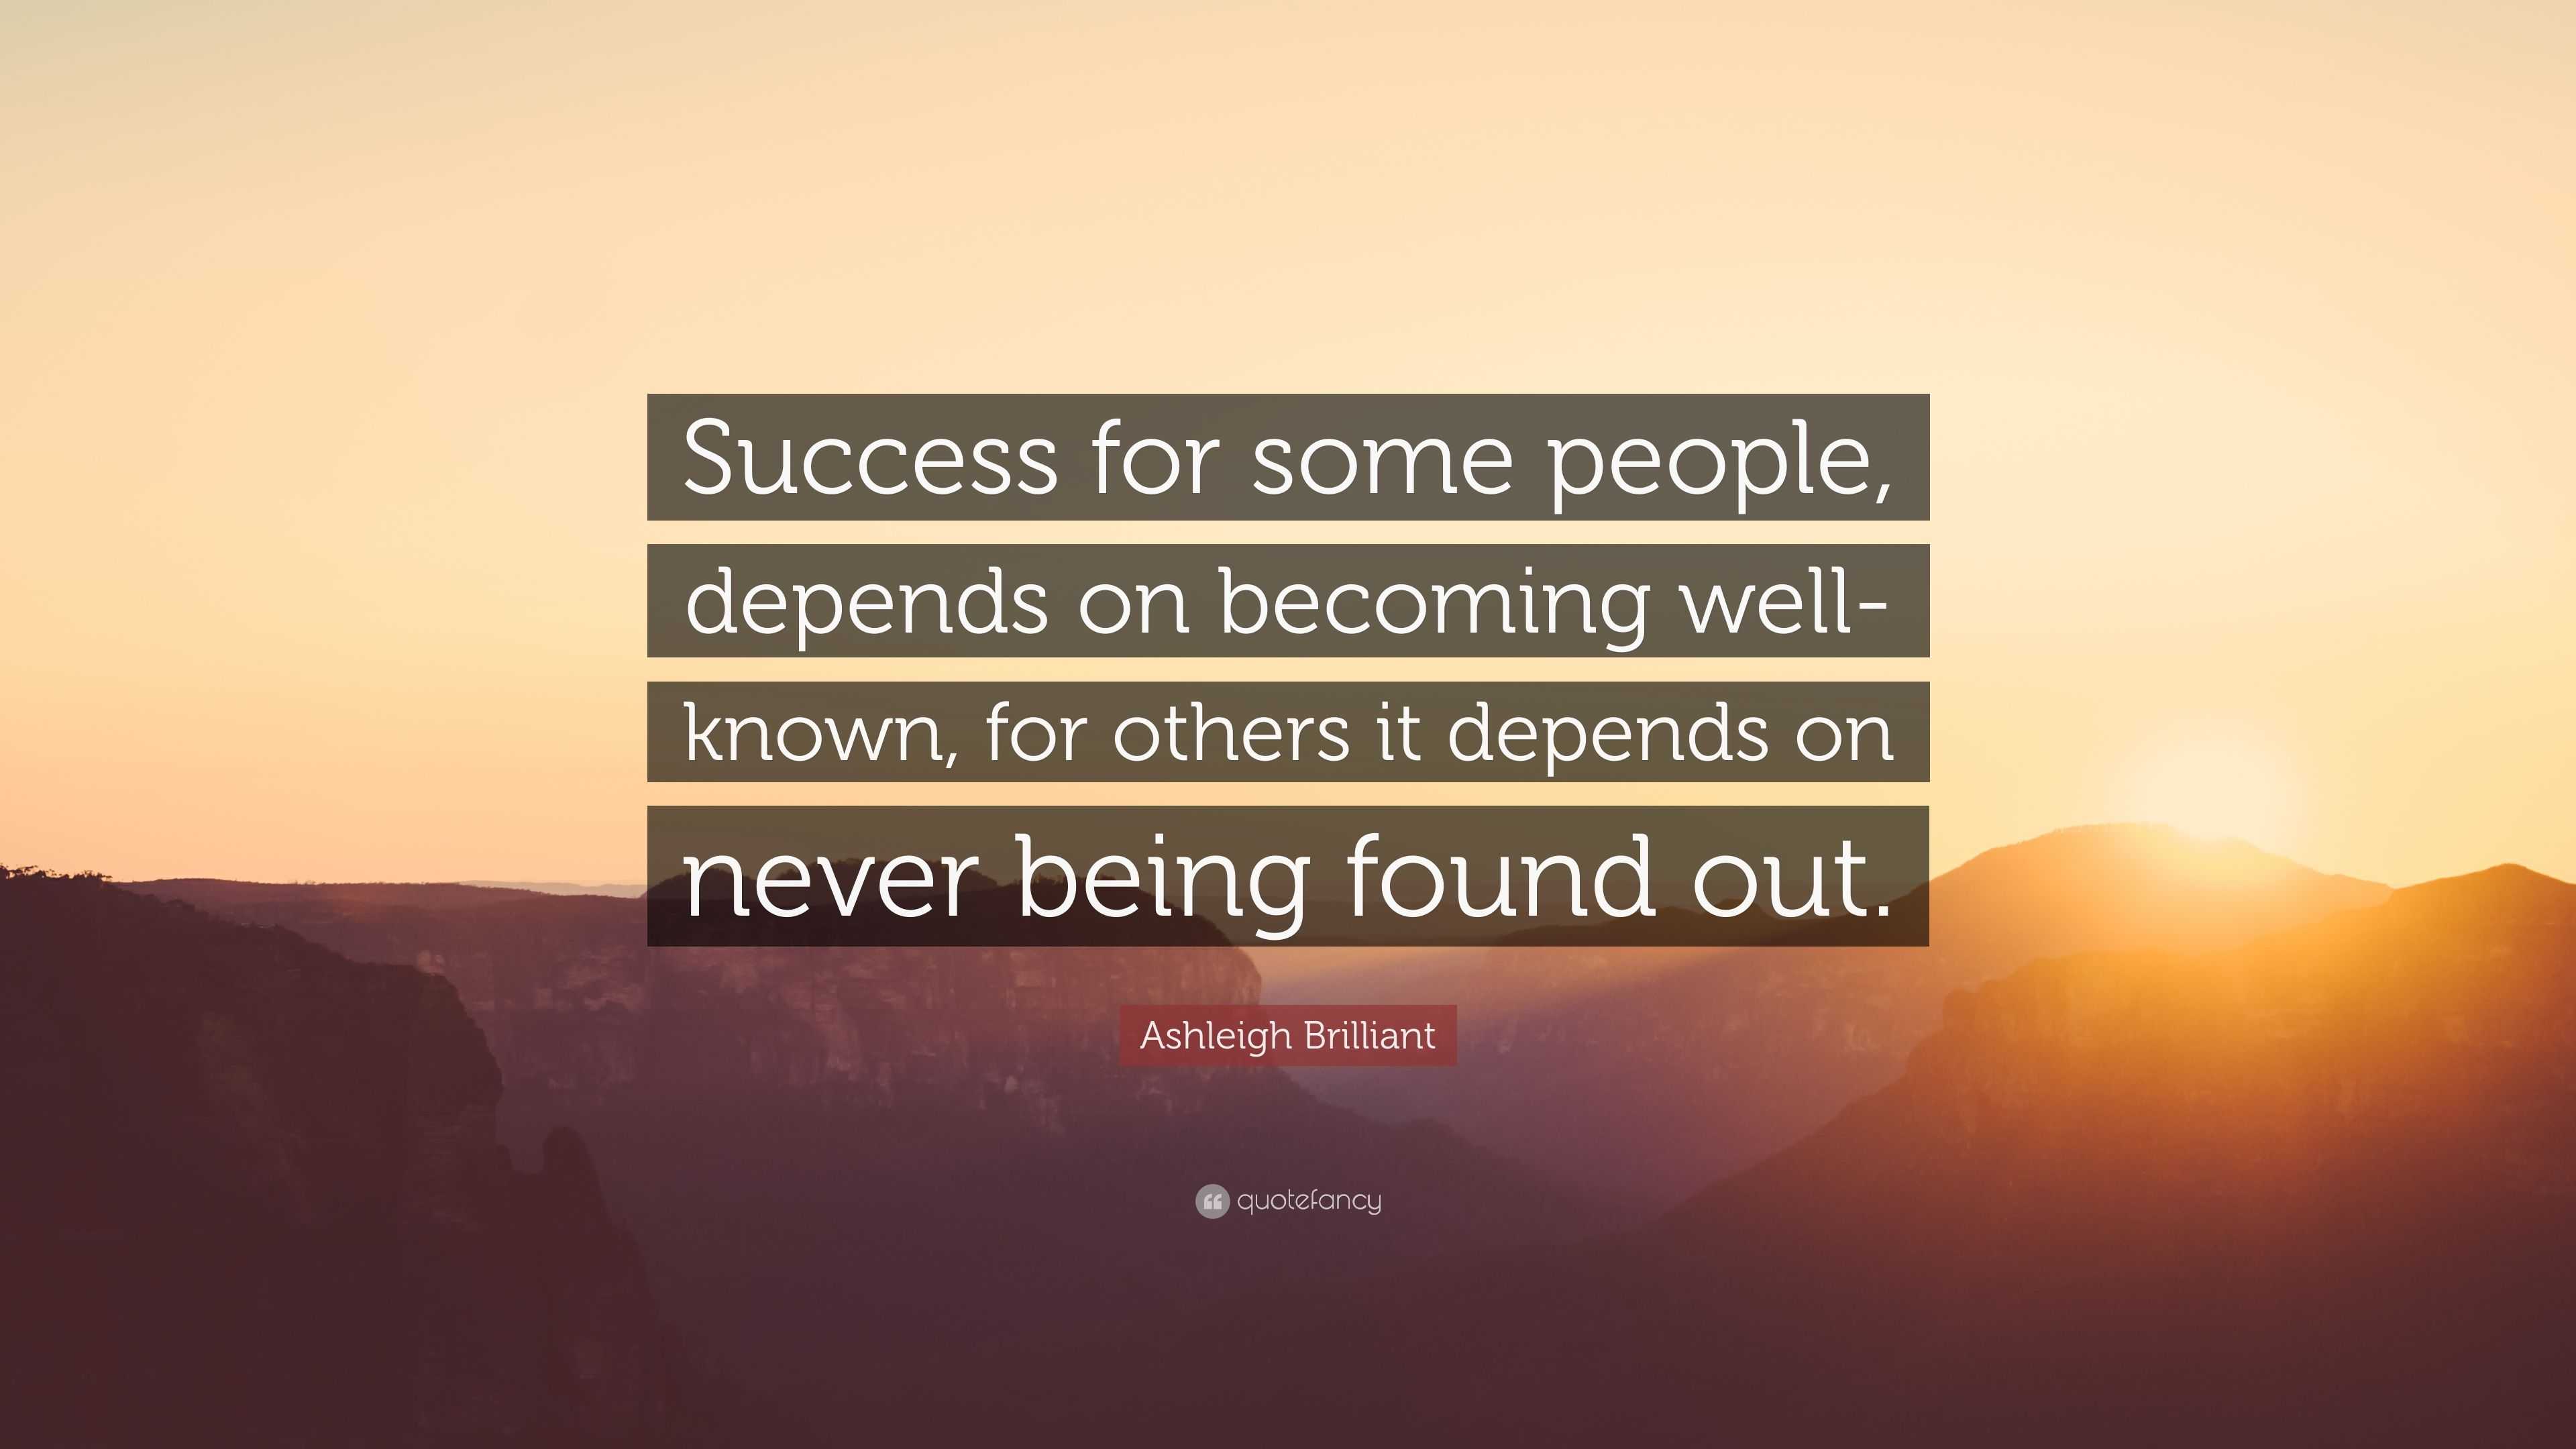 Ashleigh Brilliant Quote: “Success for some people, depends on becoming ...